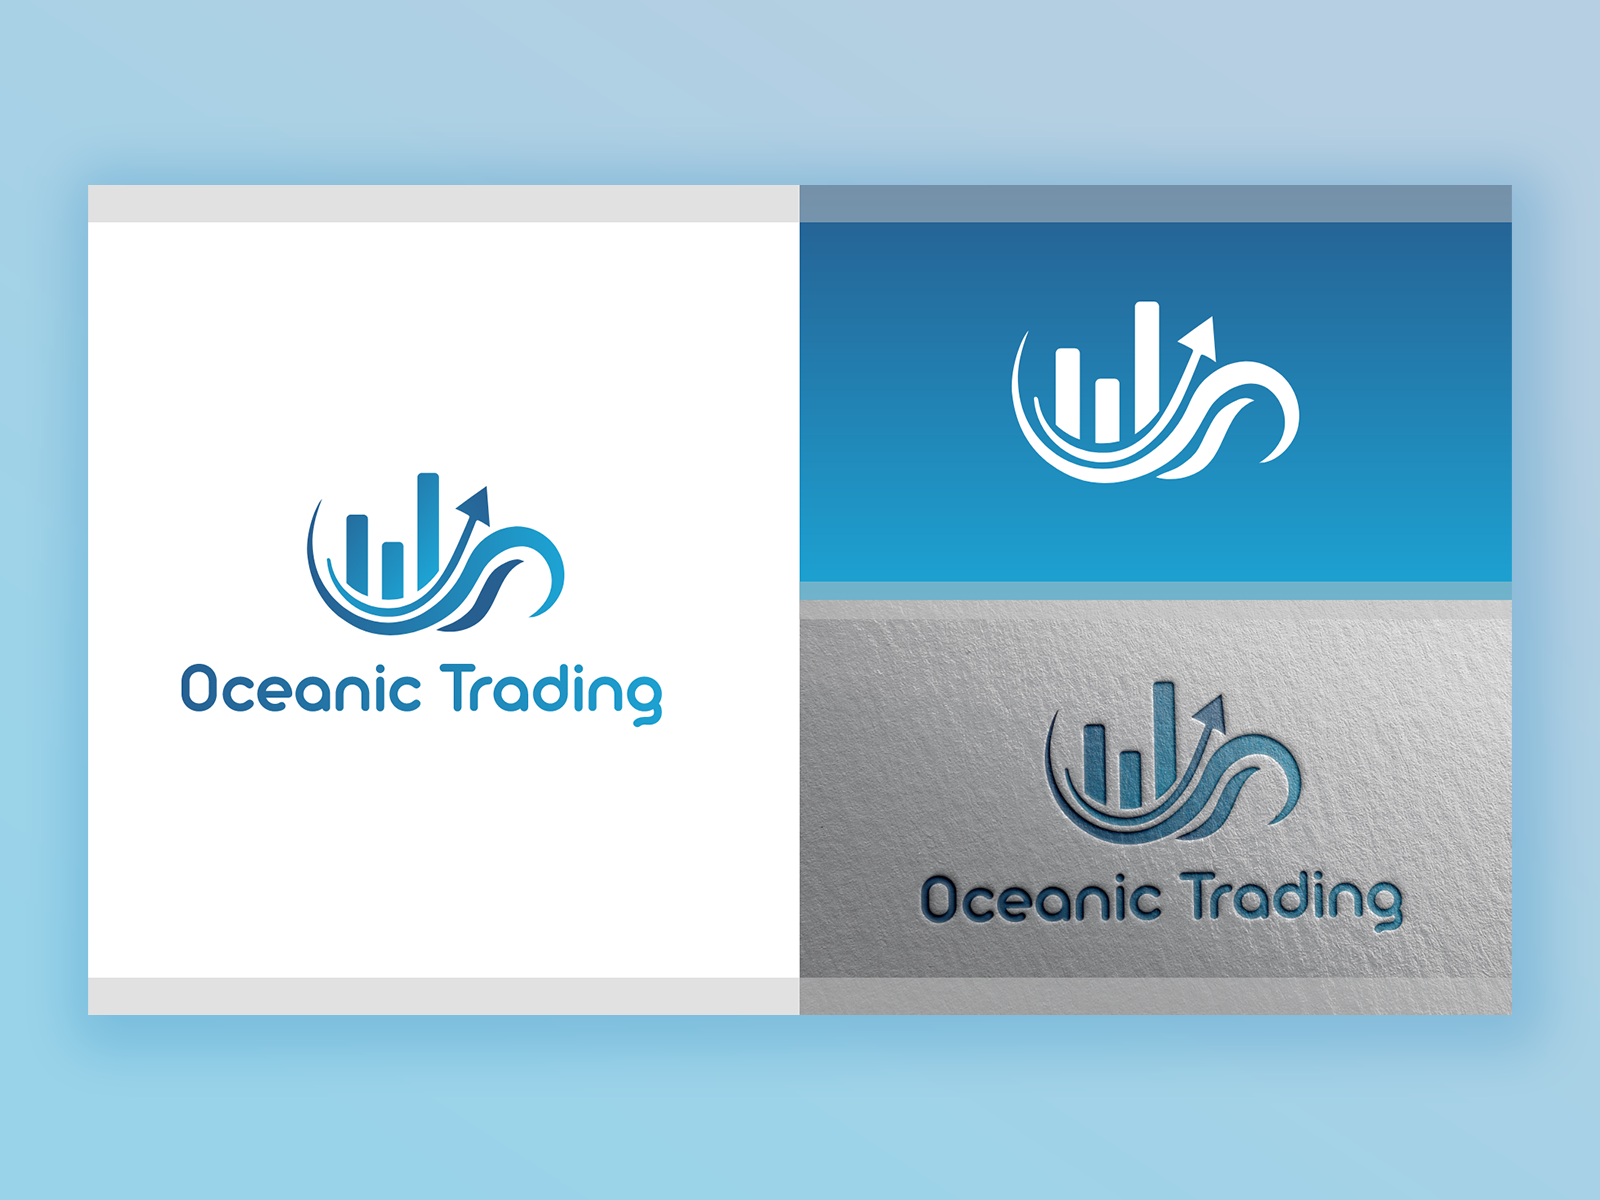 Imaginary trading business logo, which one looks best and what would you  change about them ? : r/logodesign